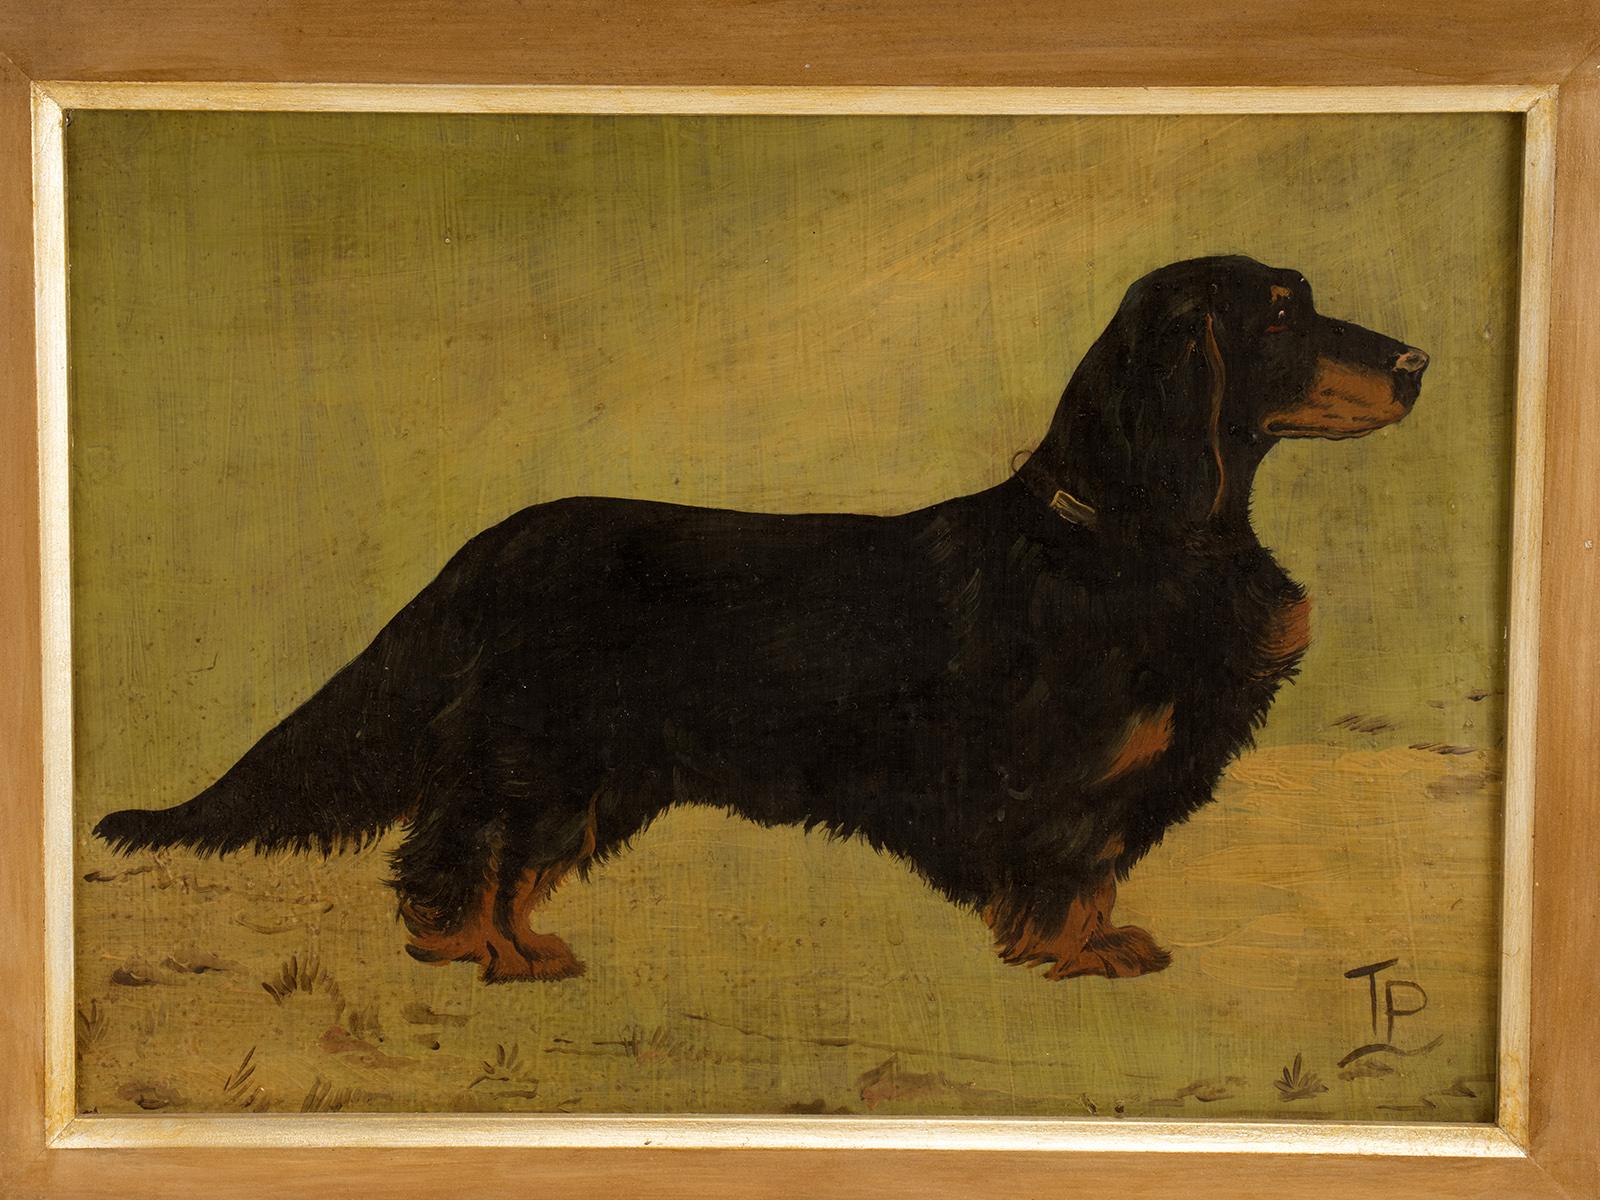 A painting oil on wood depicting a long-haired dachshund dog. Signed. Golden painted wooden frame. England circa 1920.